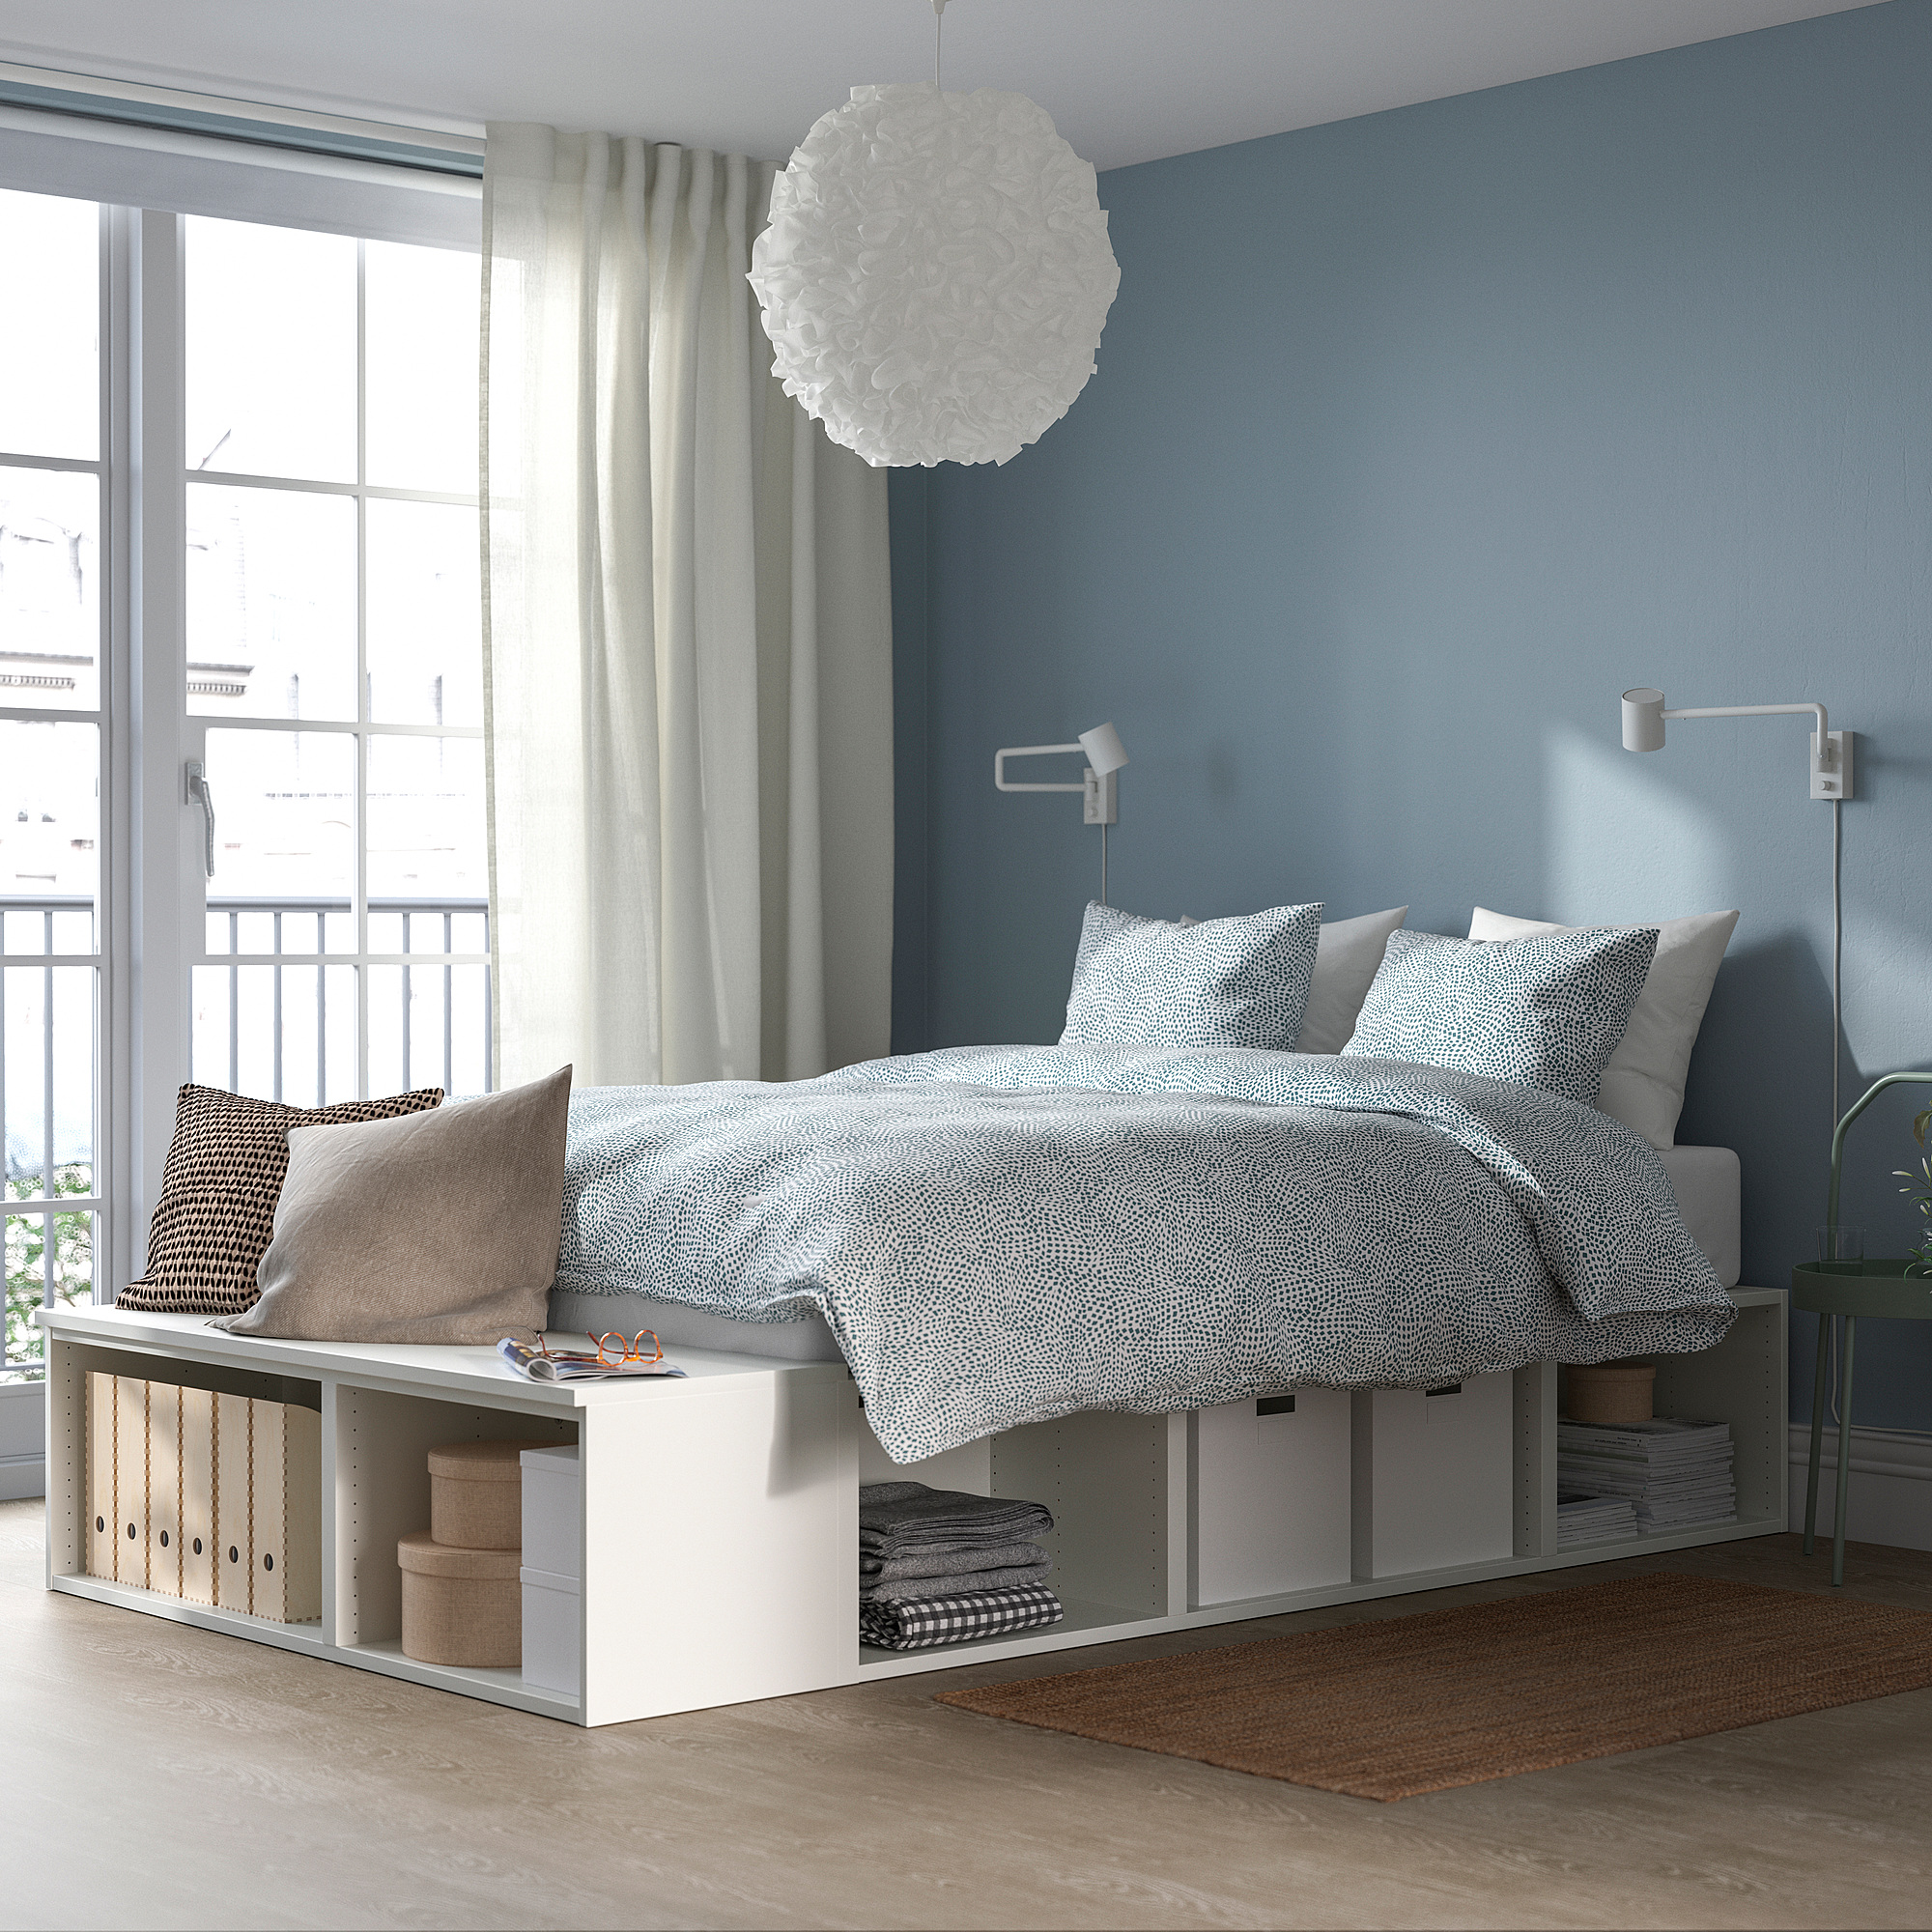 PLATSA bed frame with storage